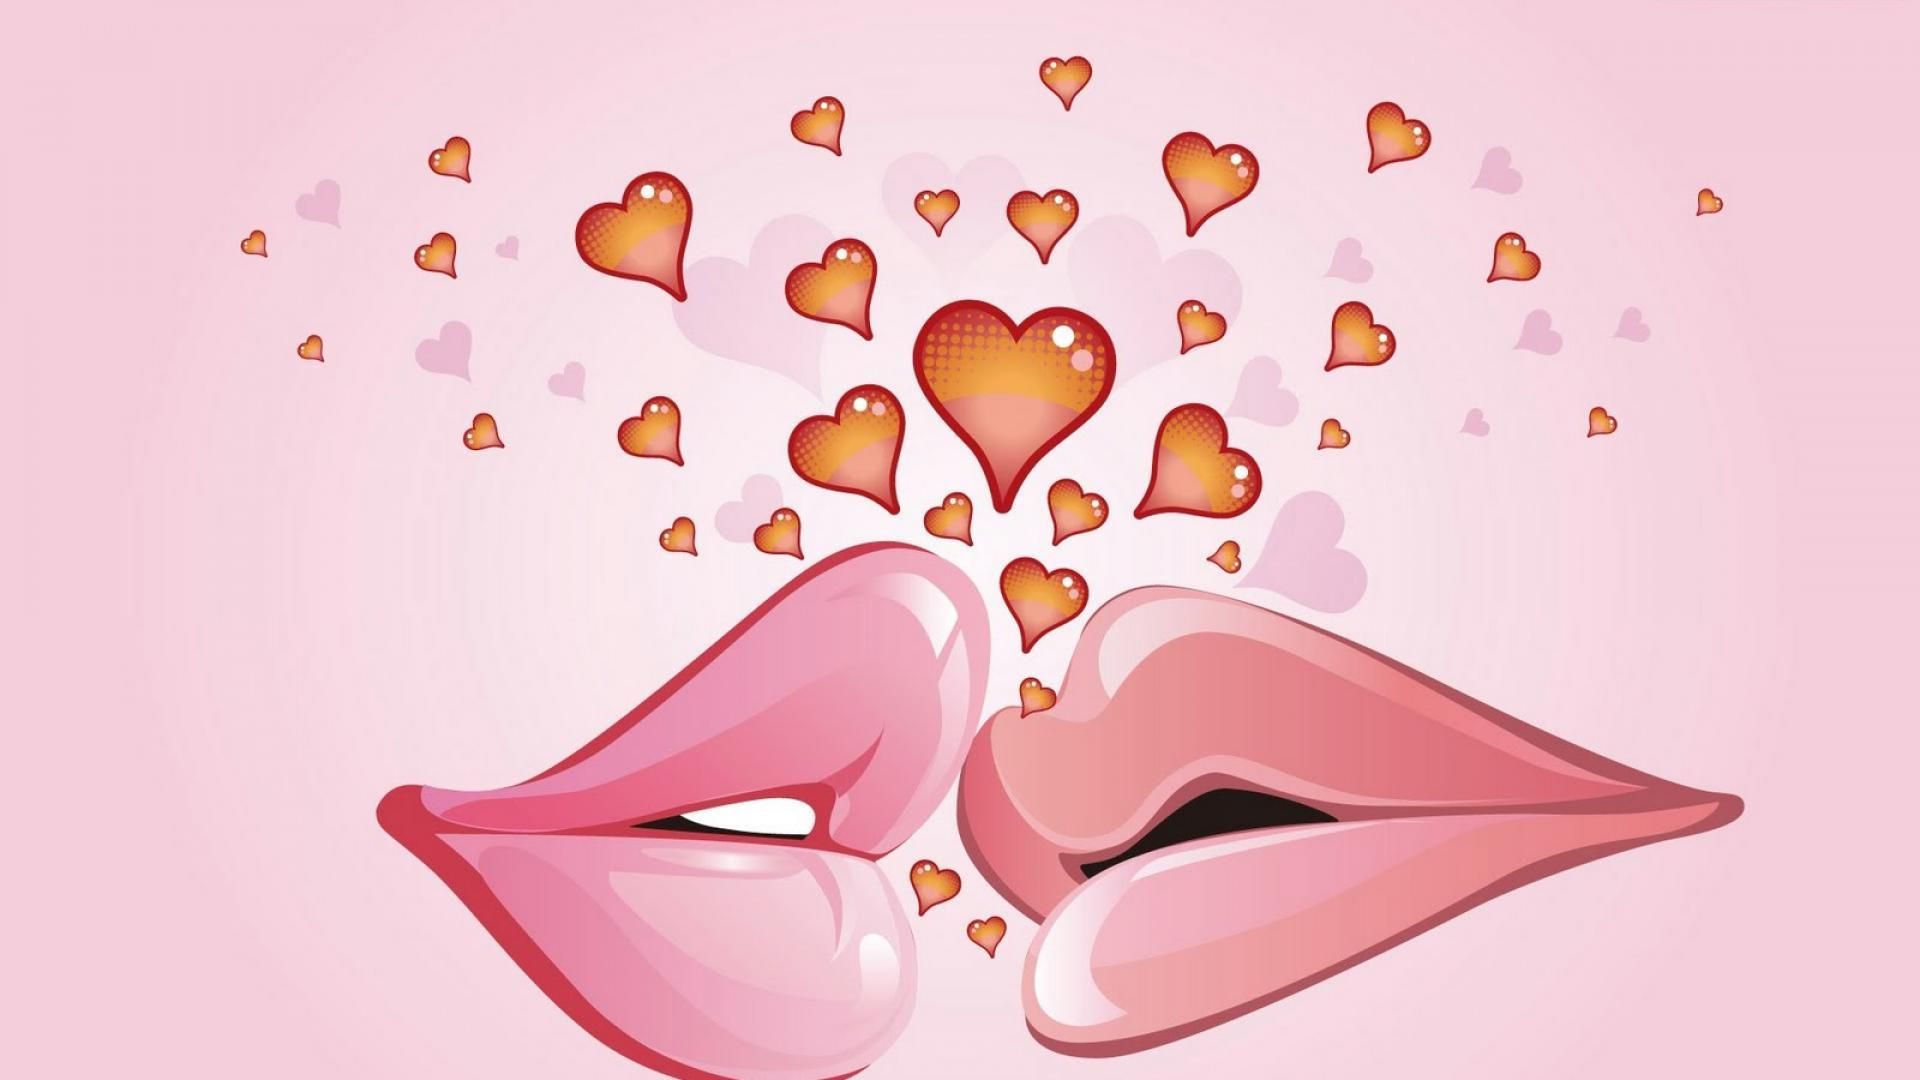 100% Quality Hd Images Collection Of Love - Animation Of Happy Kiss Day , HD Wallpaper & Backgrounds